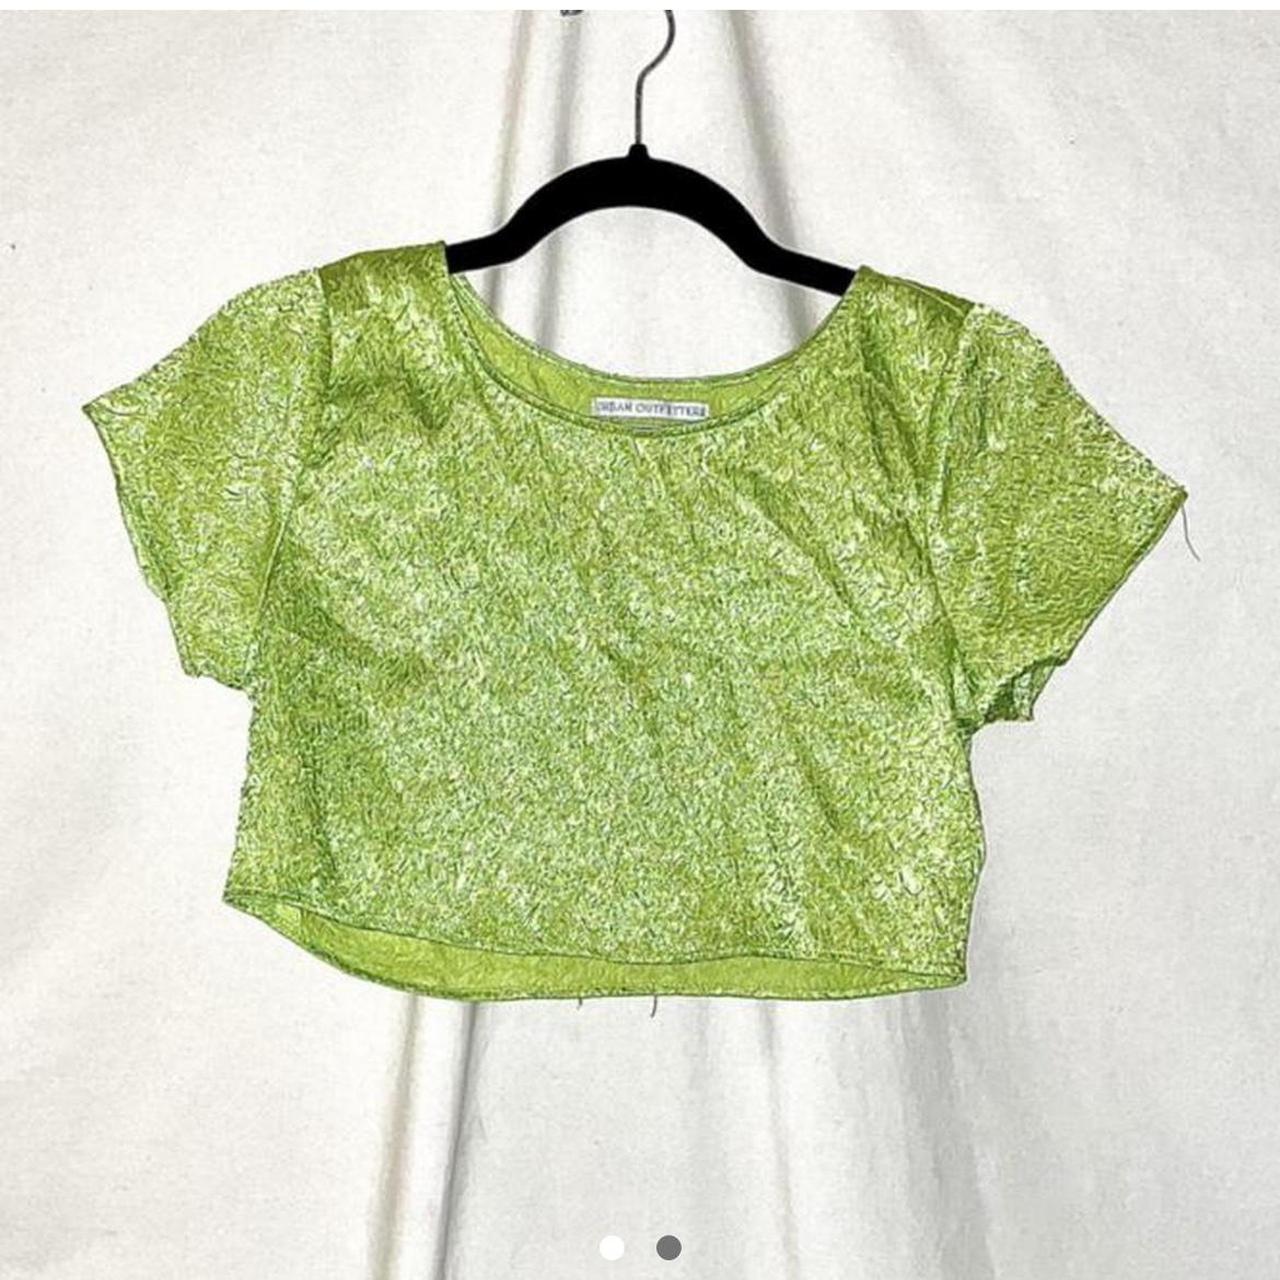 Textured green cropped top - Depop